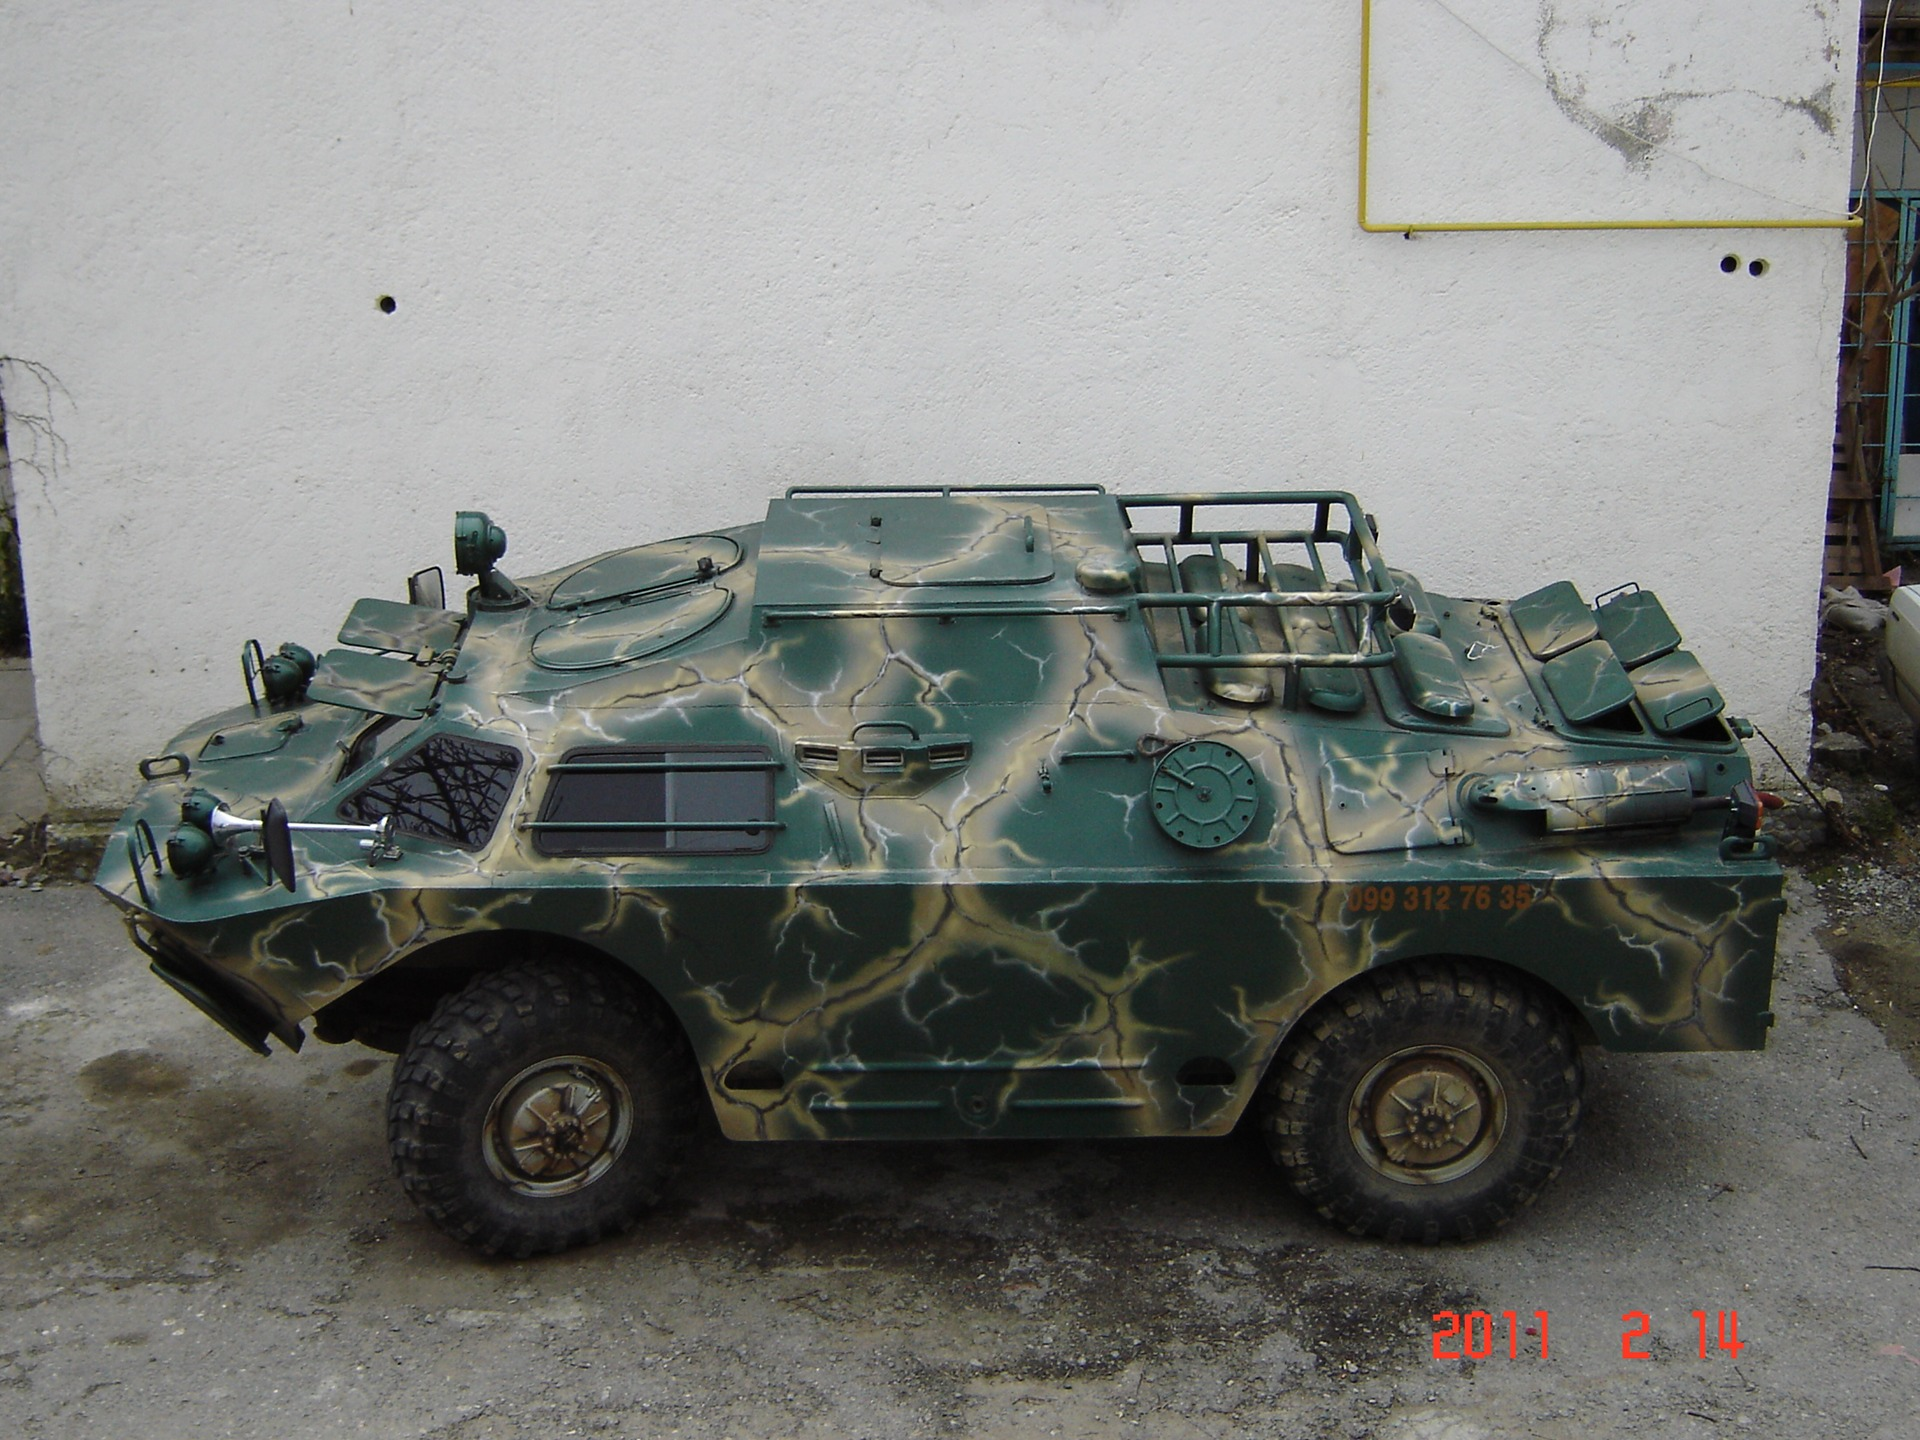 Demilitarization of the BRDM-2 - Brdm-2, Armoured personnel carriers, How is it done, Longpost, Repeat